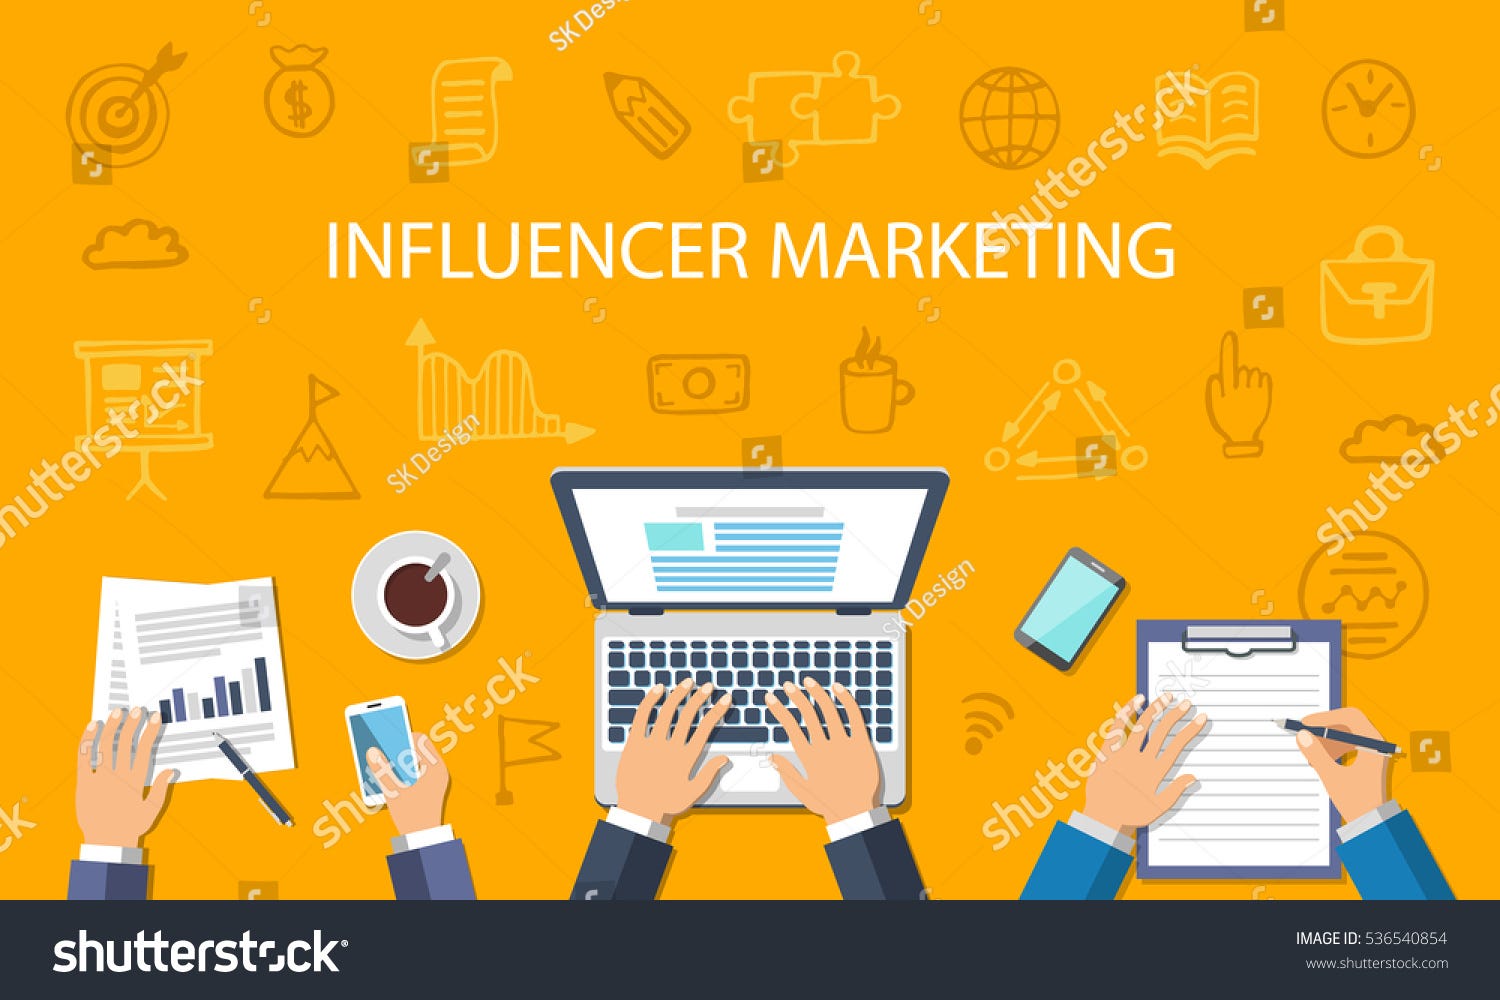 INFLUENCER MARKETING IN INDIA